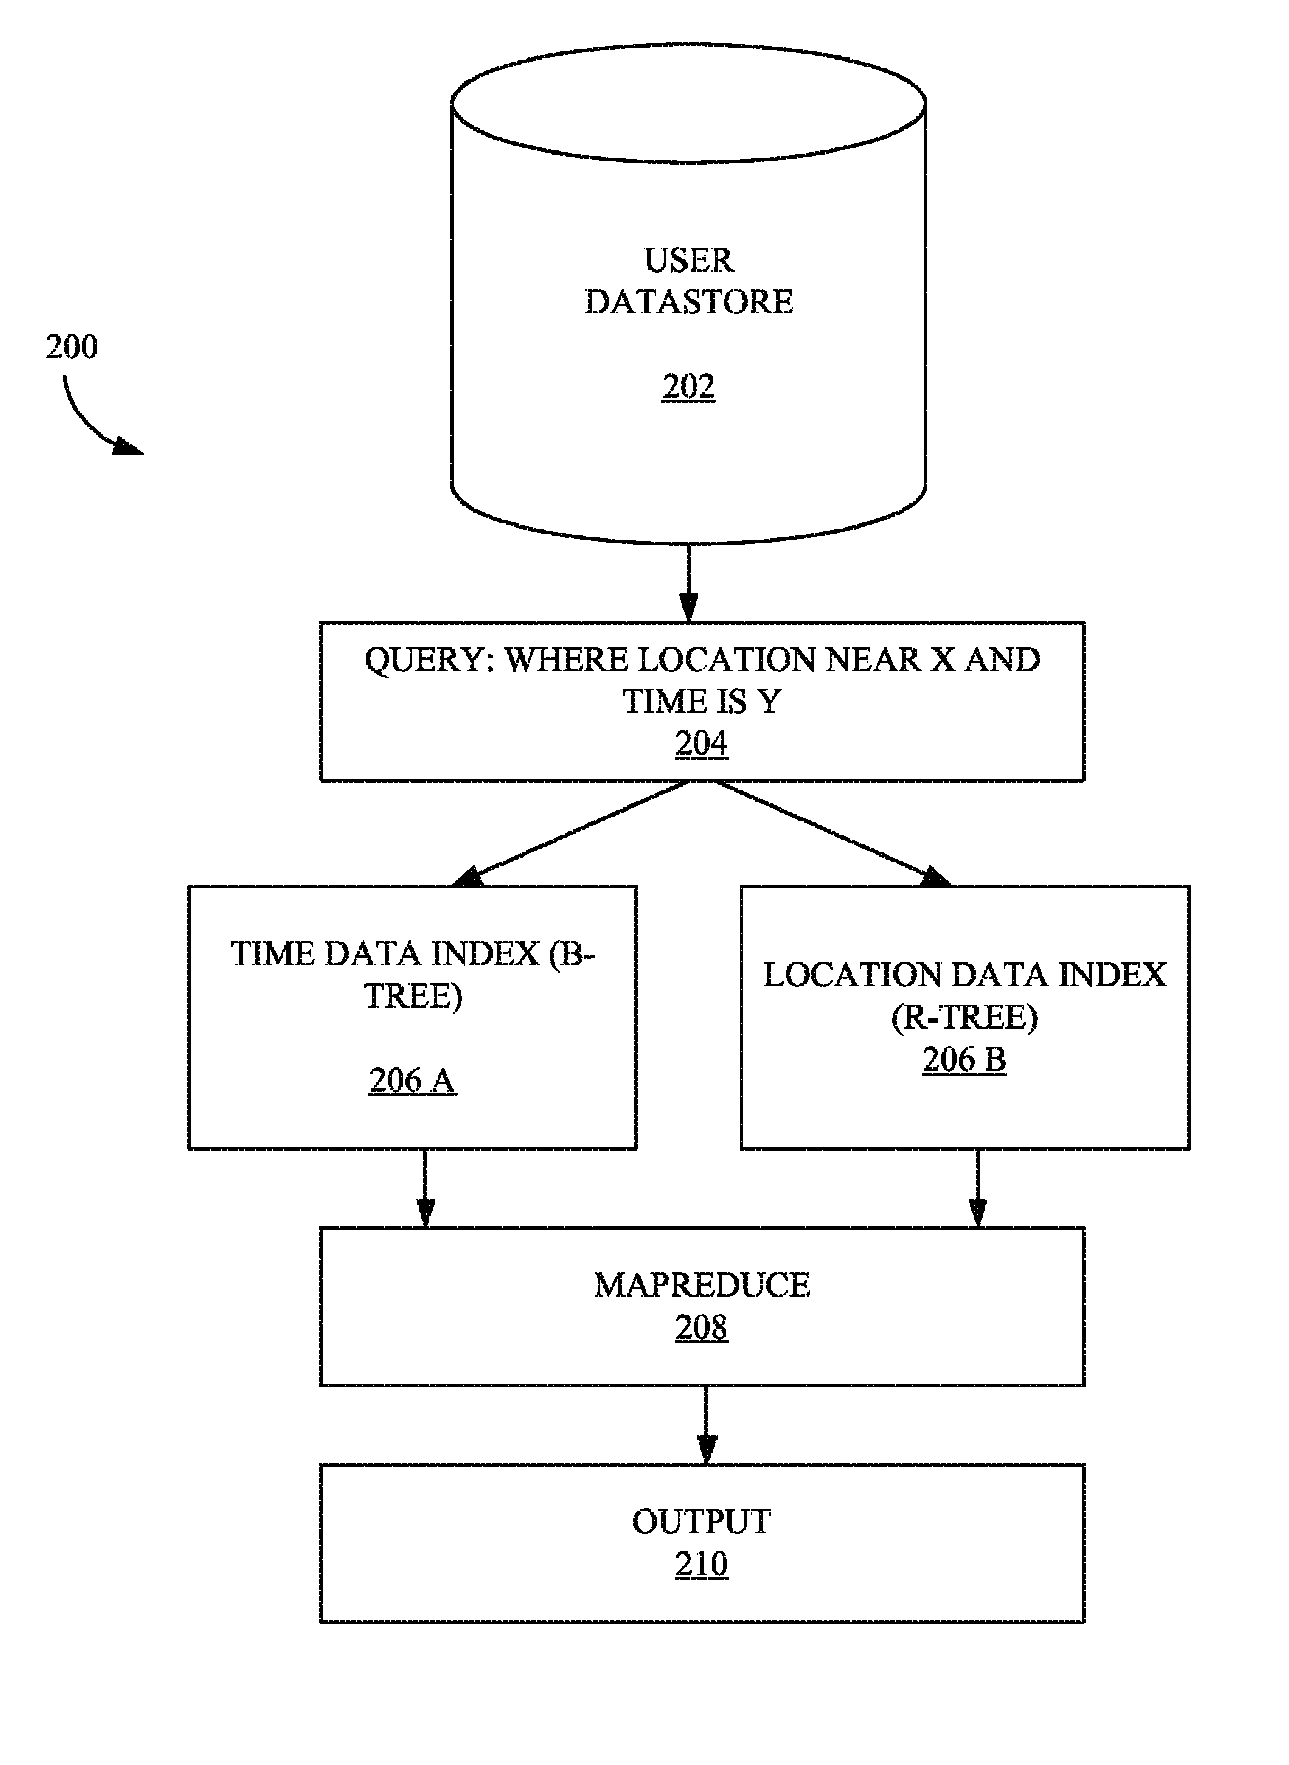 Method and system of mapreduce implementations on indexed datasets in a distributed database environment